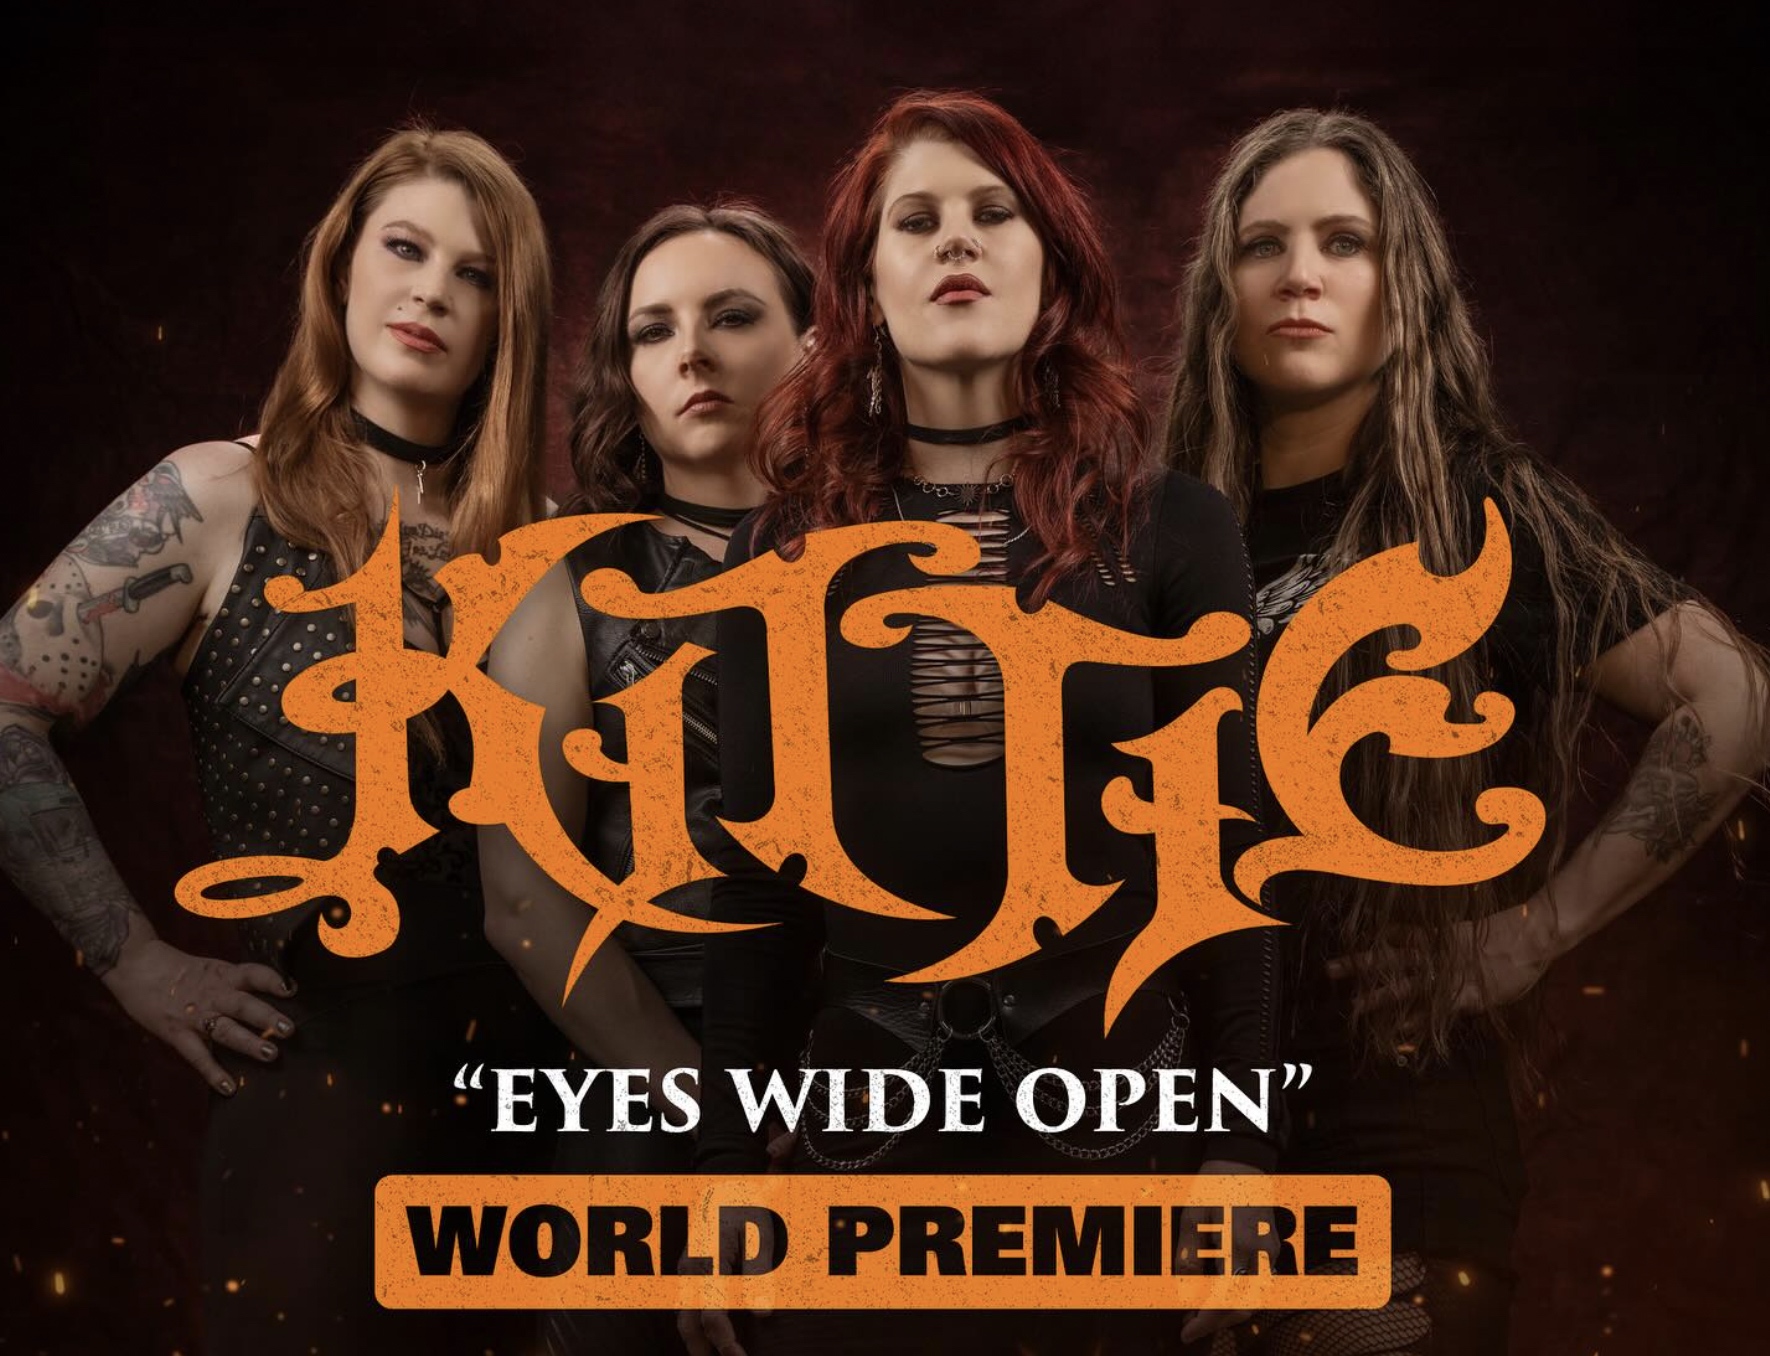 Queens Of Metal Kittie Release First New Music In 13 Years And Sign To New Label